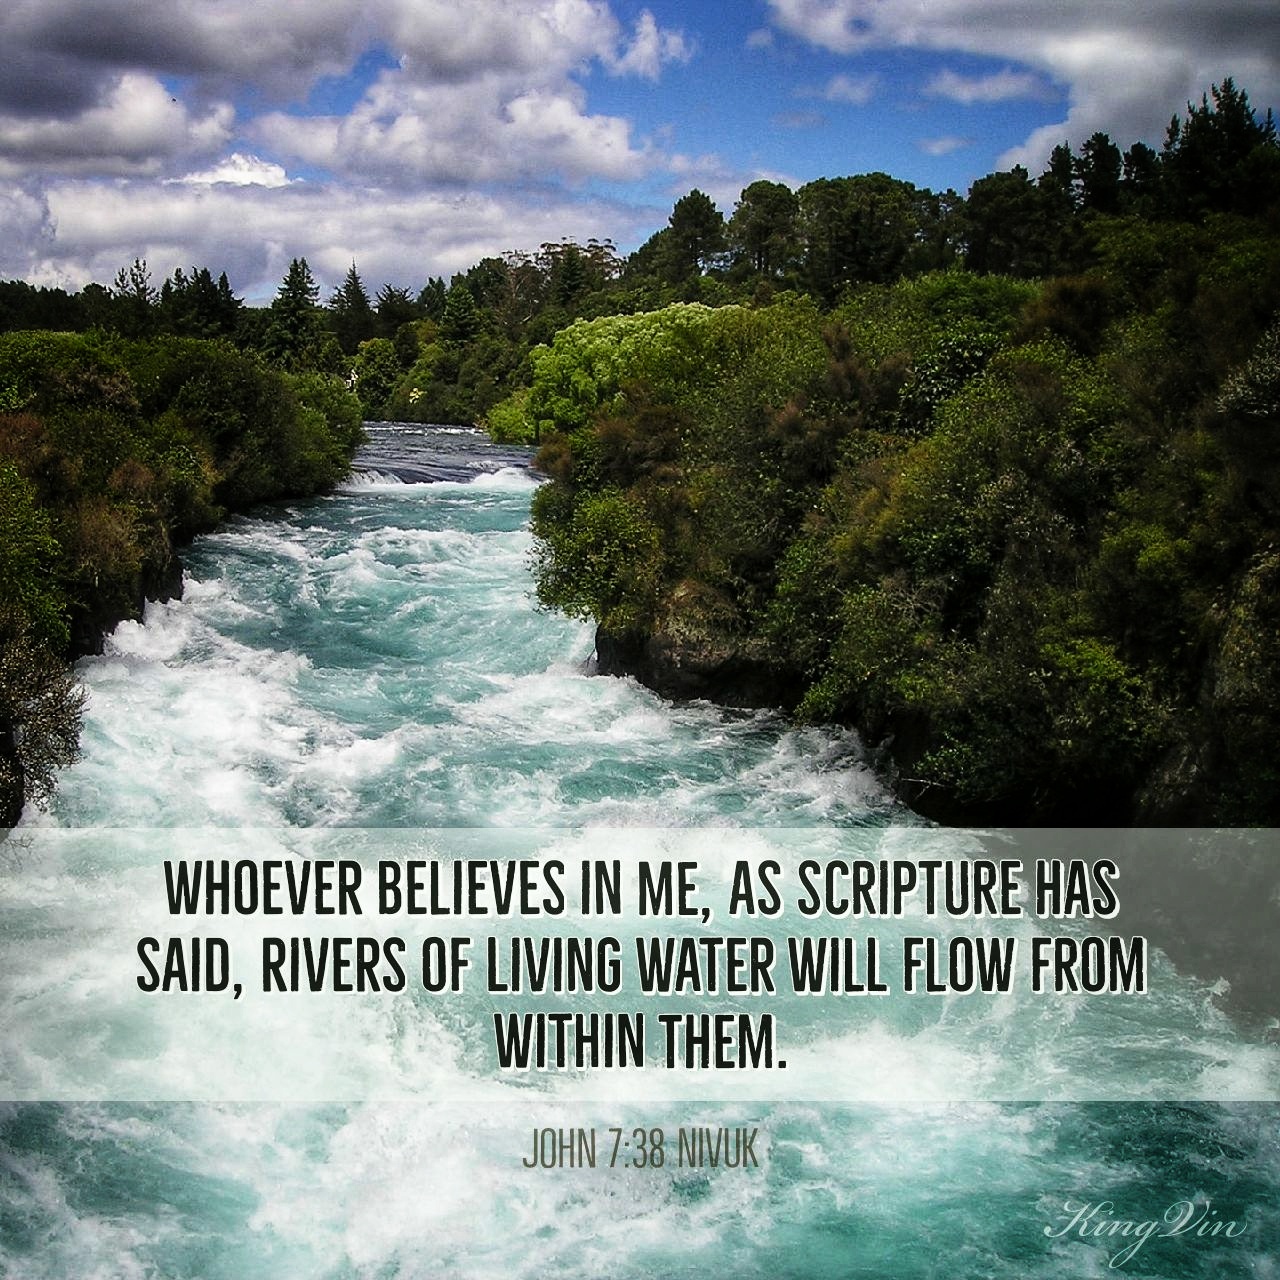 Whoever believes in me, as Scripture has said, rivers of living water will flow from within them. John 7:38 NIVUK